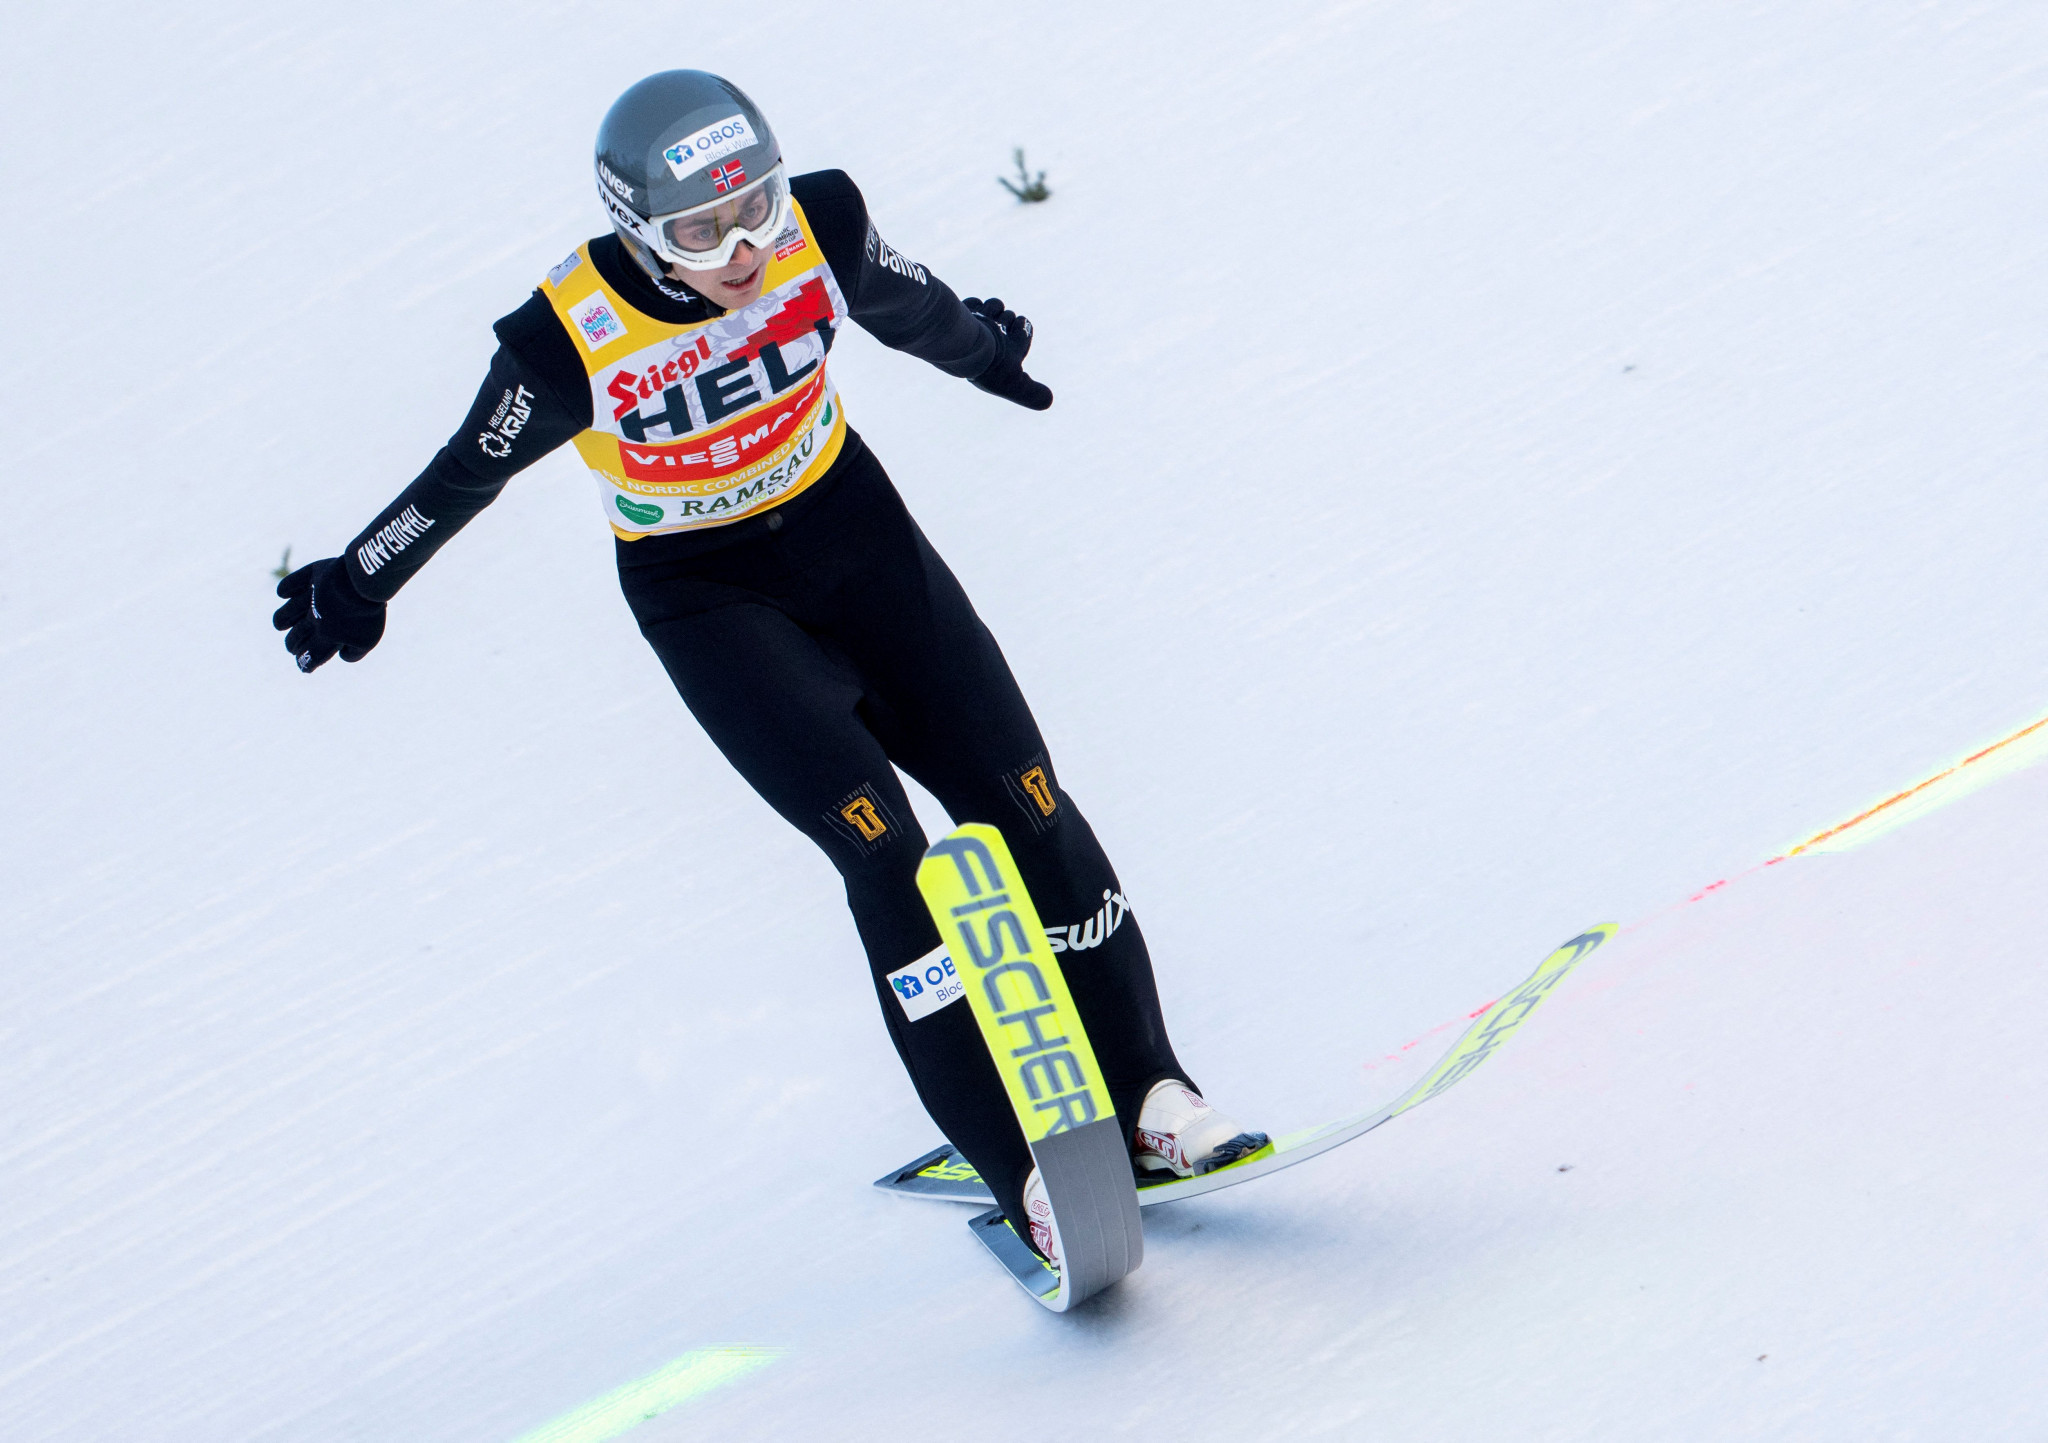 Riiber returns to Nordic Combined World Cup in style with PCR win in Seefeld